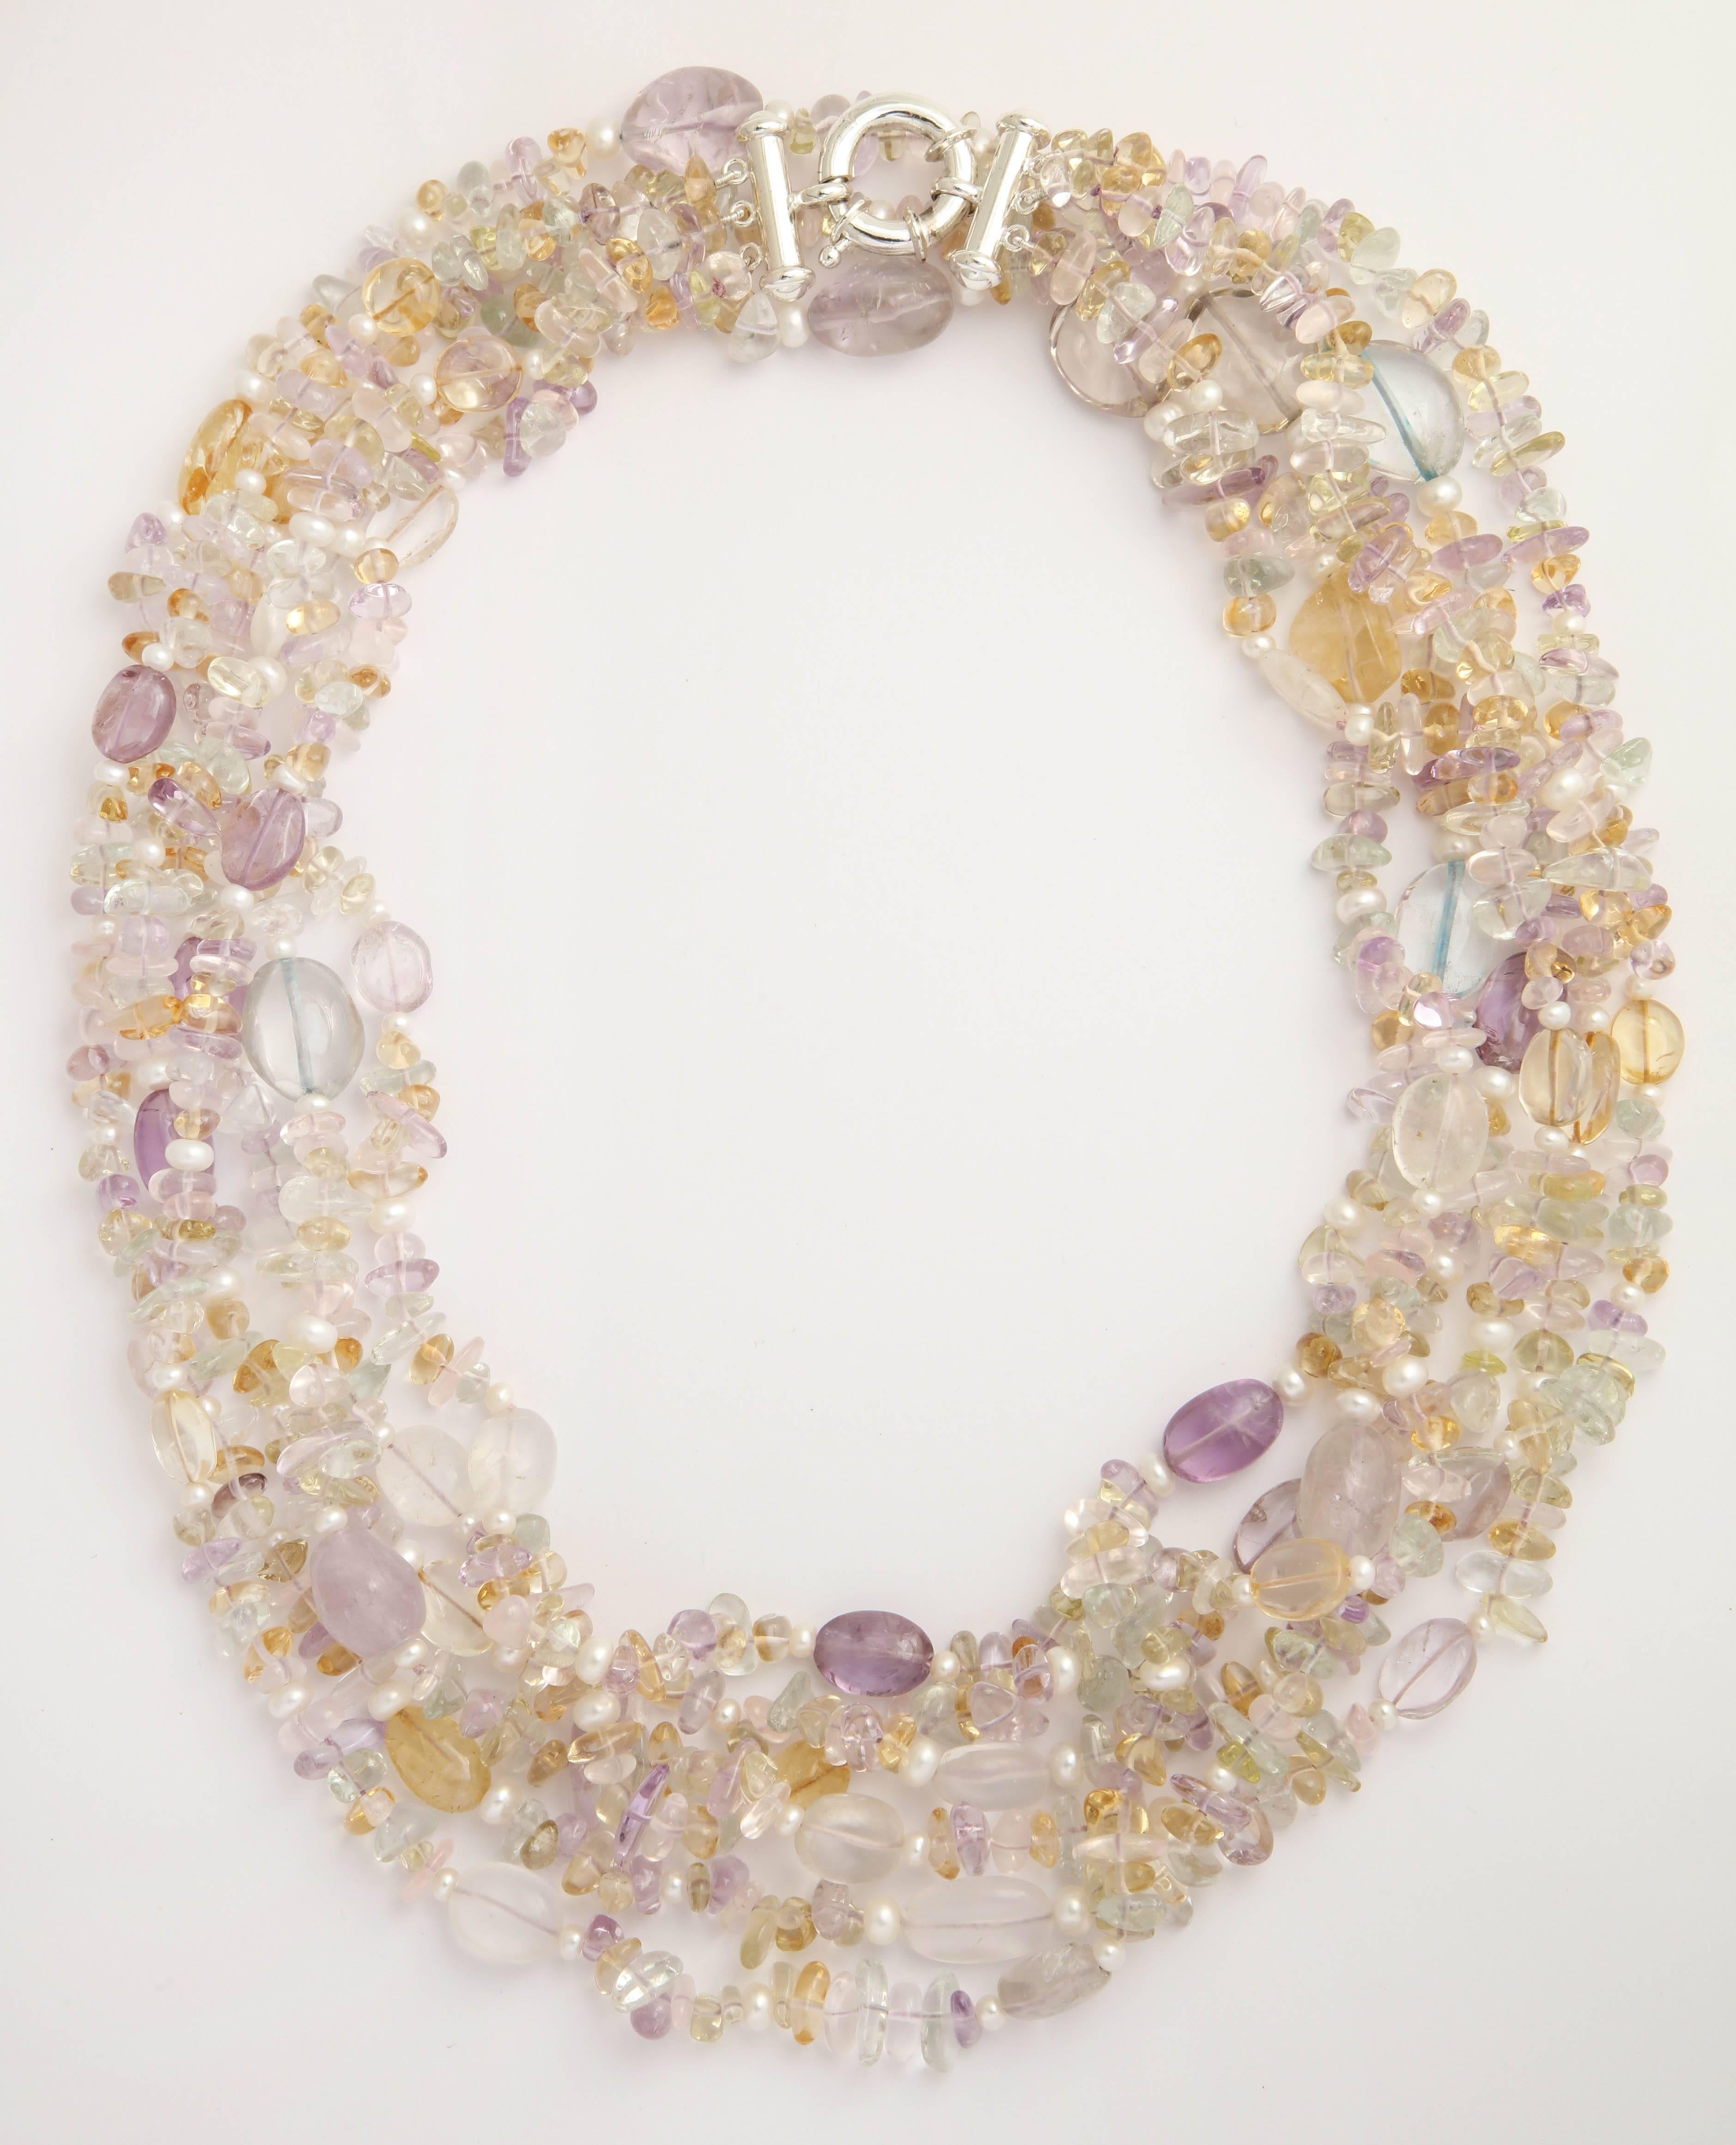 These are beautiful pastel amethyst, citrine, blue topaz. peridot  smooth baroque shaped beads and fresh water pearls. The necklace is comprised of 3 strand and is 48 in. long and can be worn doubled around the necklace. Great colors for any spring